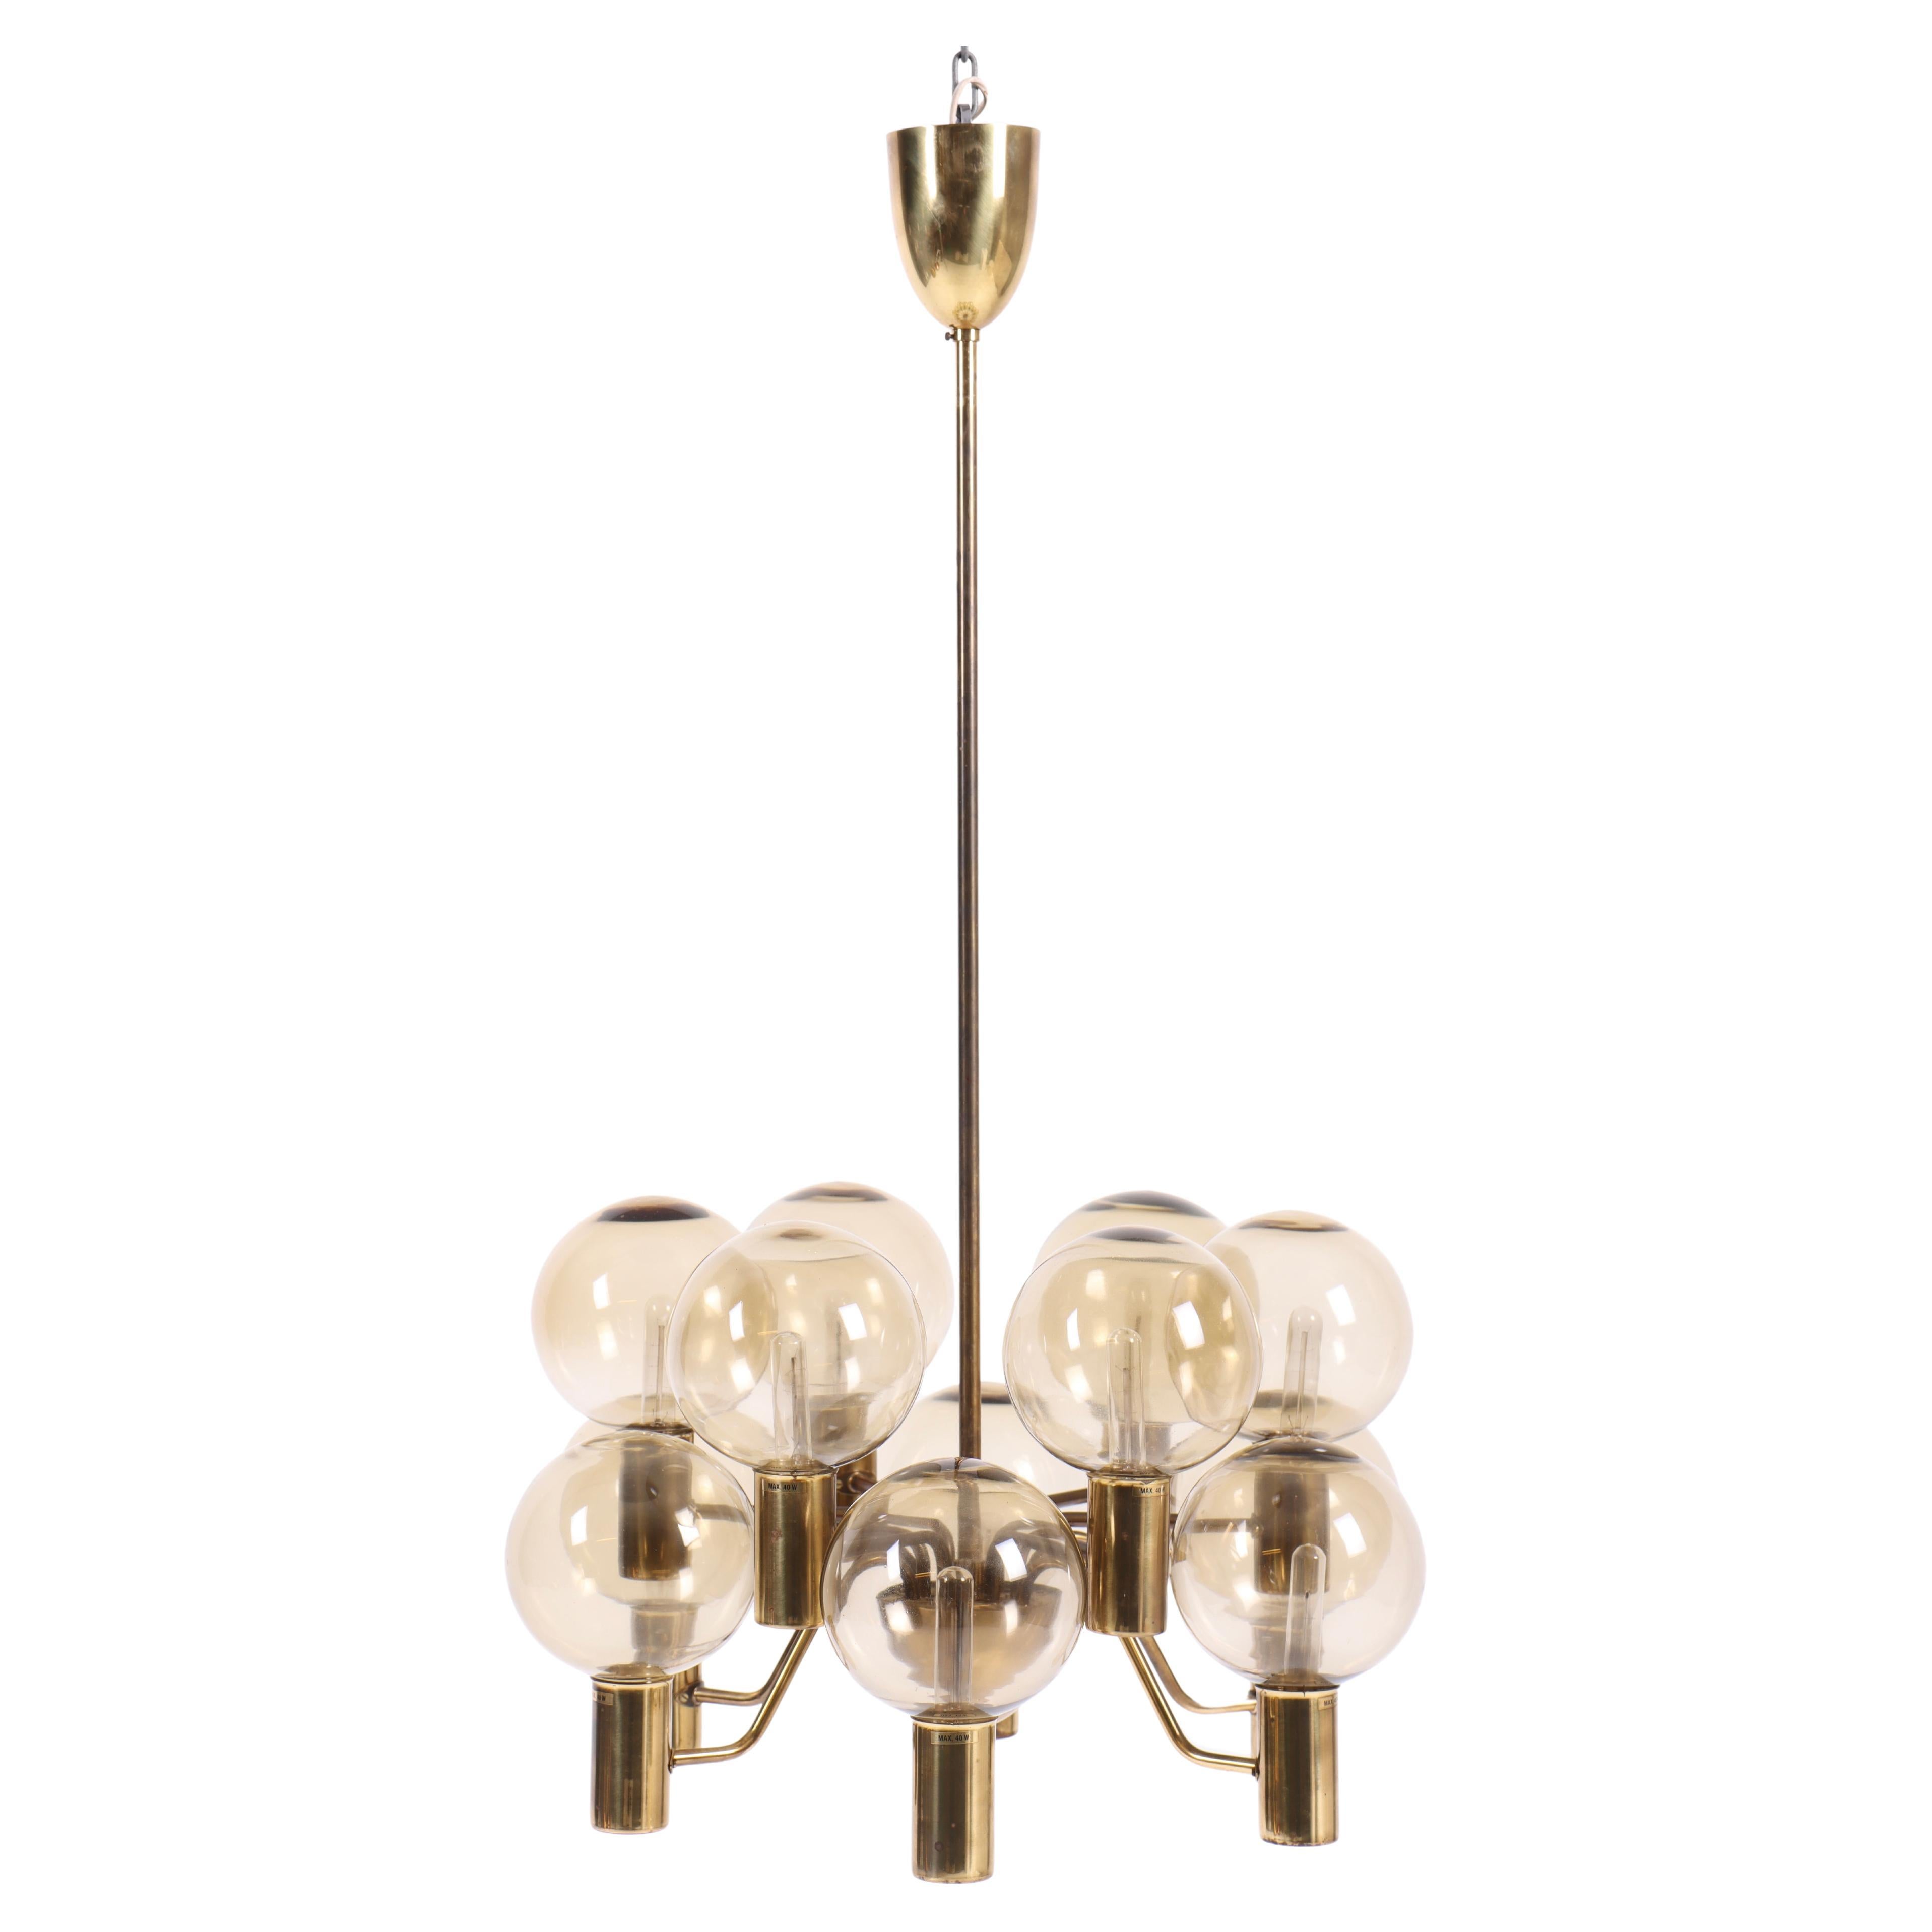 Midcentury ""Patricia" Chandelier in Brass and Glass, by Hans-Agne Jakobsson